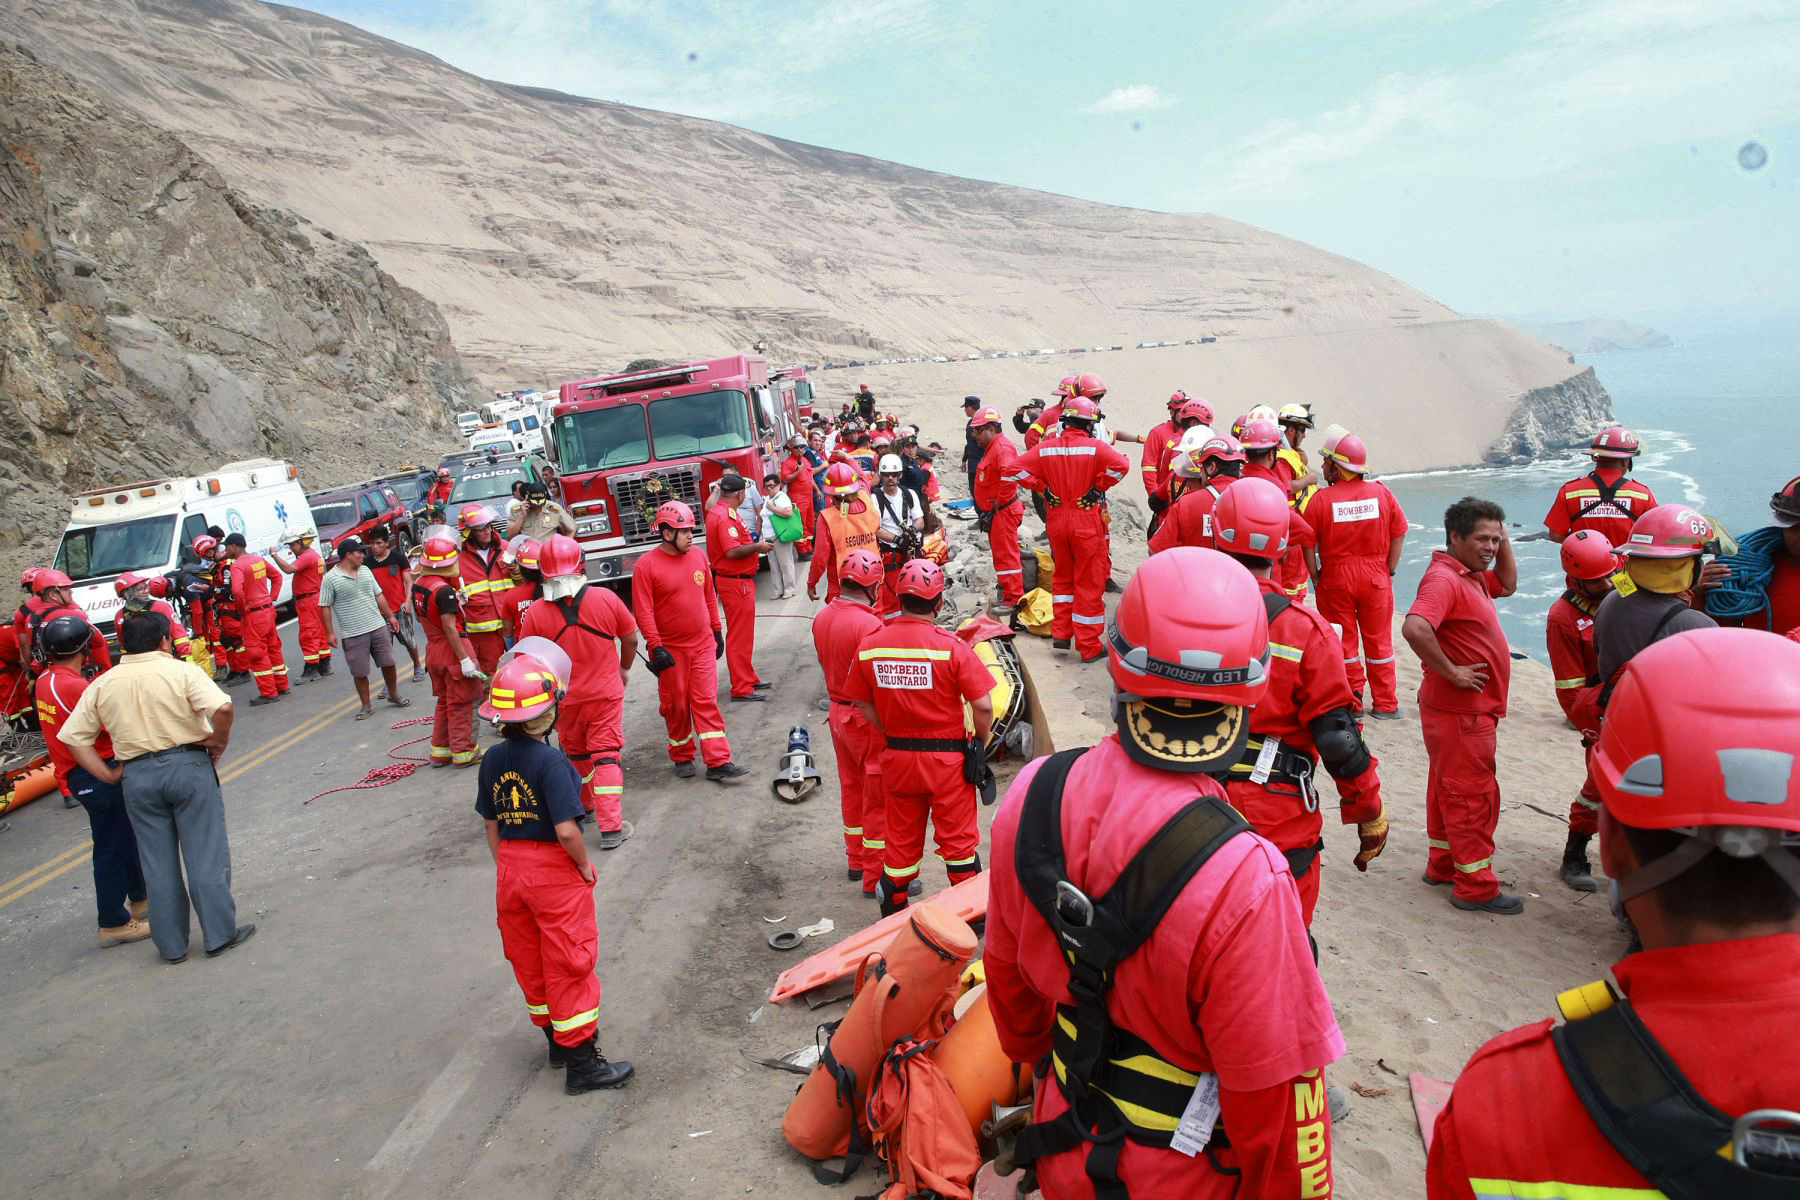 PHOTO: A picture released by Peruvian agency Andina shows firefighters and rescuers working during rescue efforts after a bus plunged over a cliff after colliding with a truck on a coastal highway near Pasamayo, on Jan. 2, 2018.